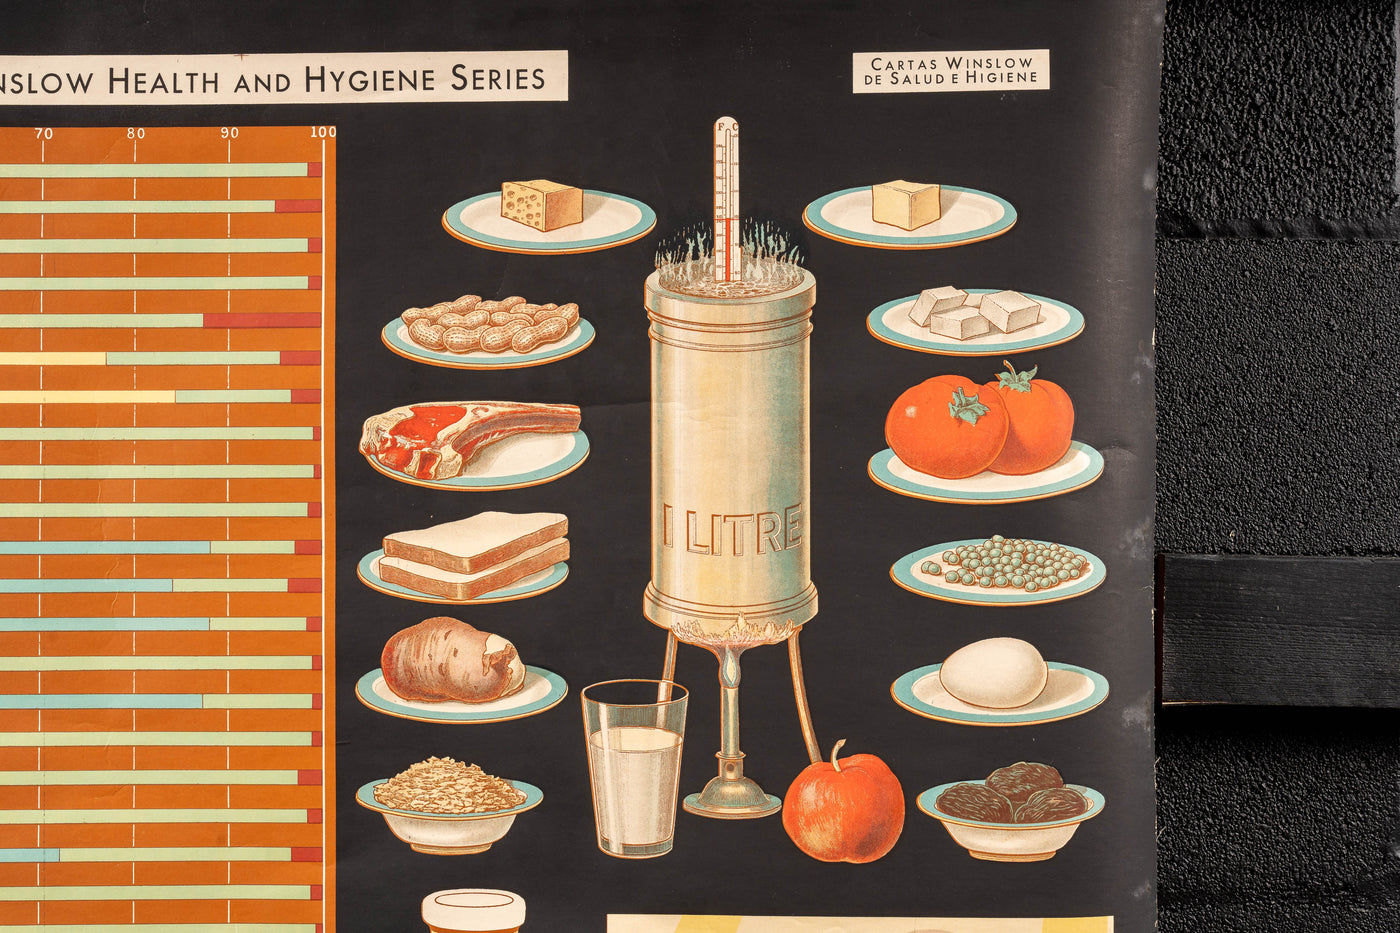 c. 1950s Winslow Health and Hygiene Food Values Pulldown Chart